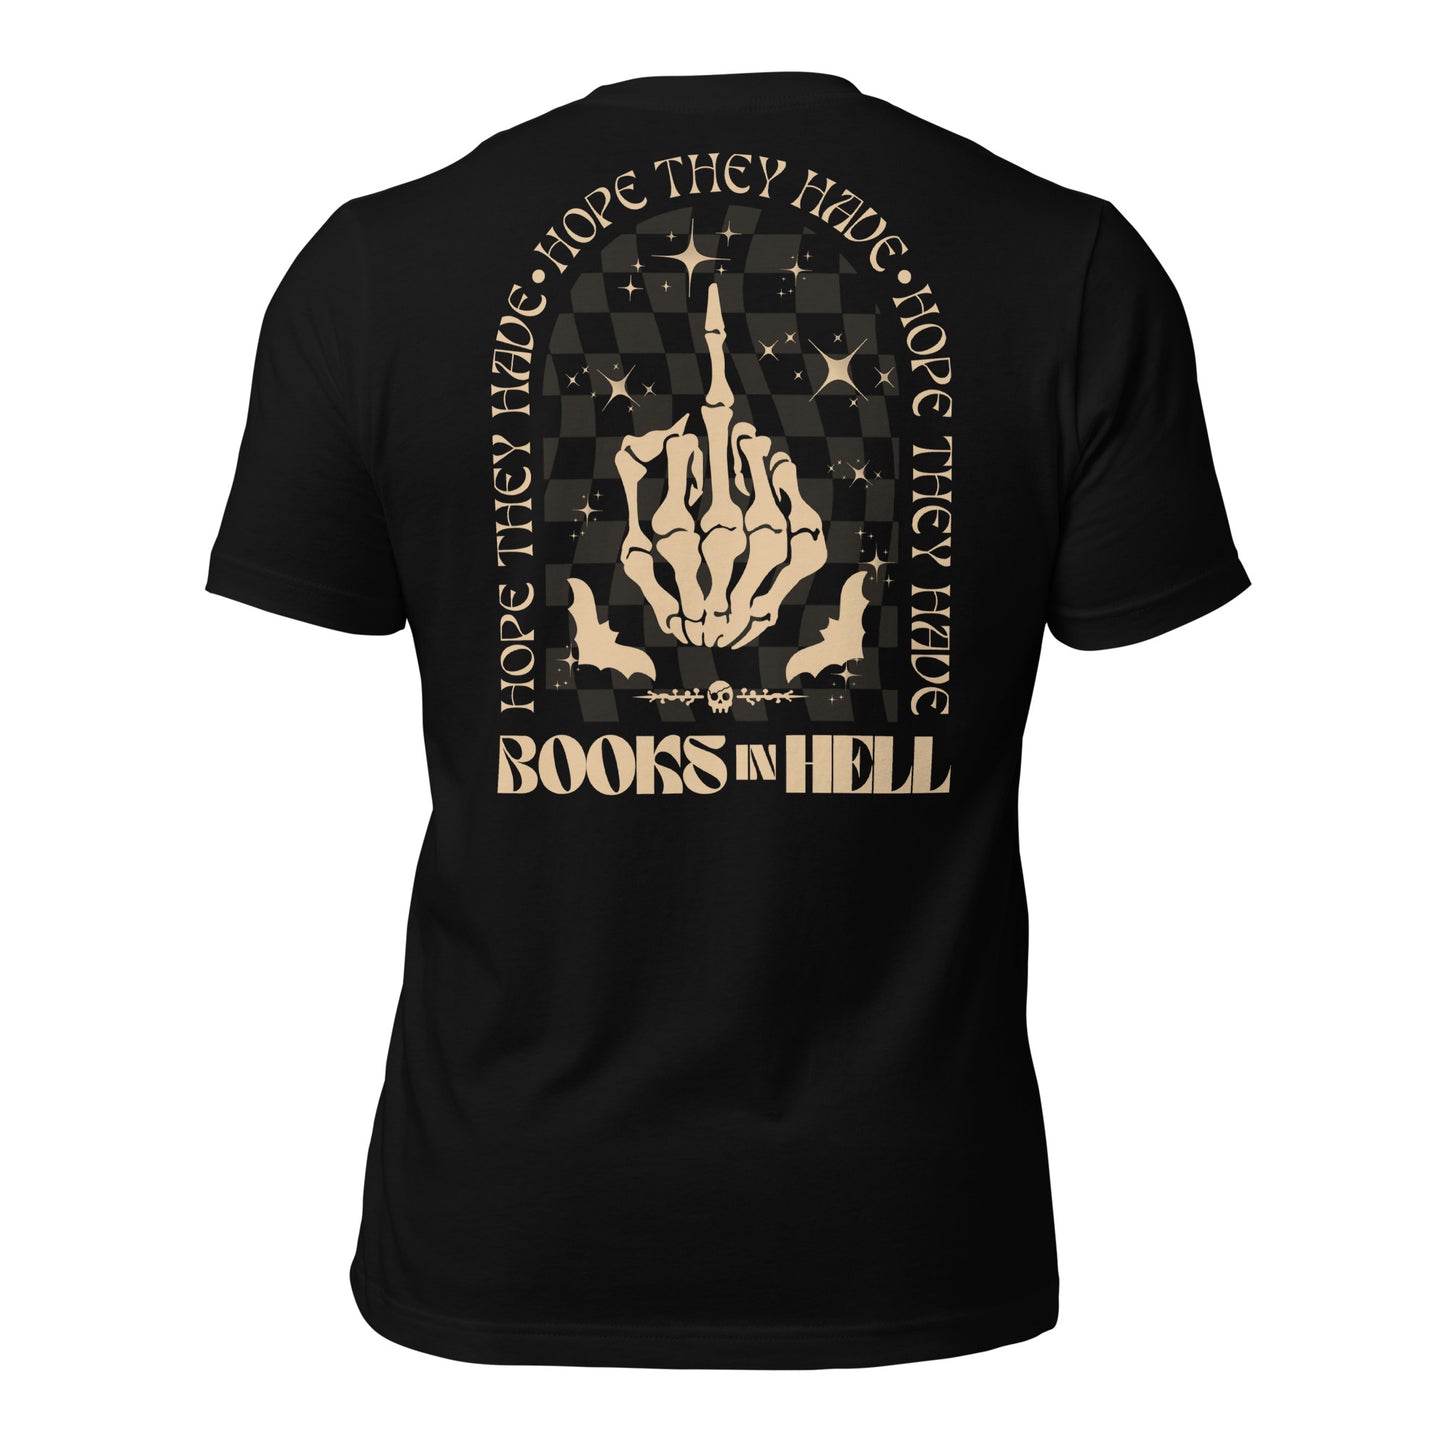 hope they have books in hell t-shirt